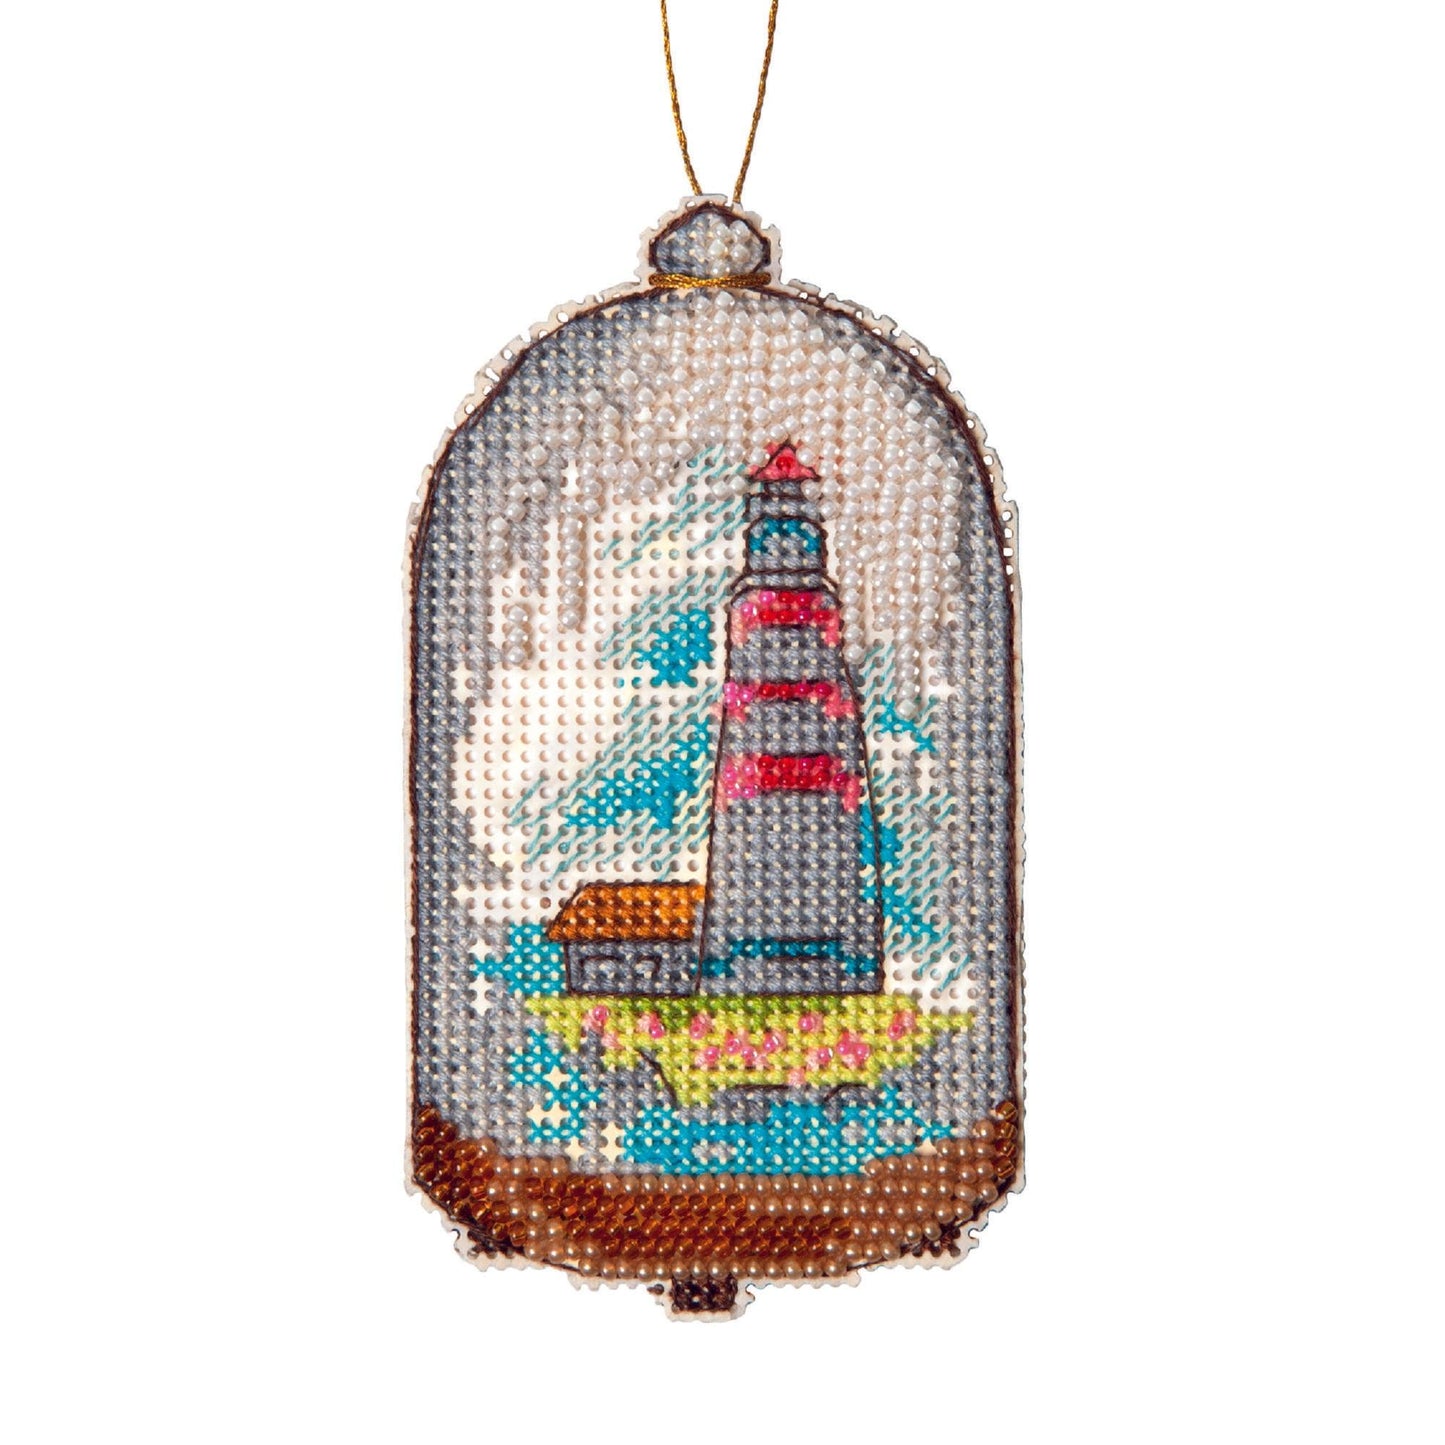 LIGHTHOUSE "In search of treasures series", Counted Cross Stitch Kit, 14 count plastic canvas, size 6,5 x 11 cm, CRYSTAL ART (T-87) - Leo Hobby